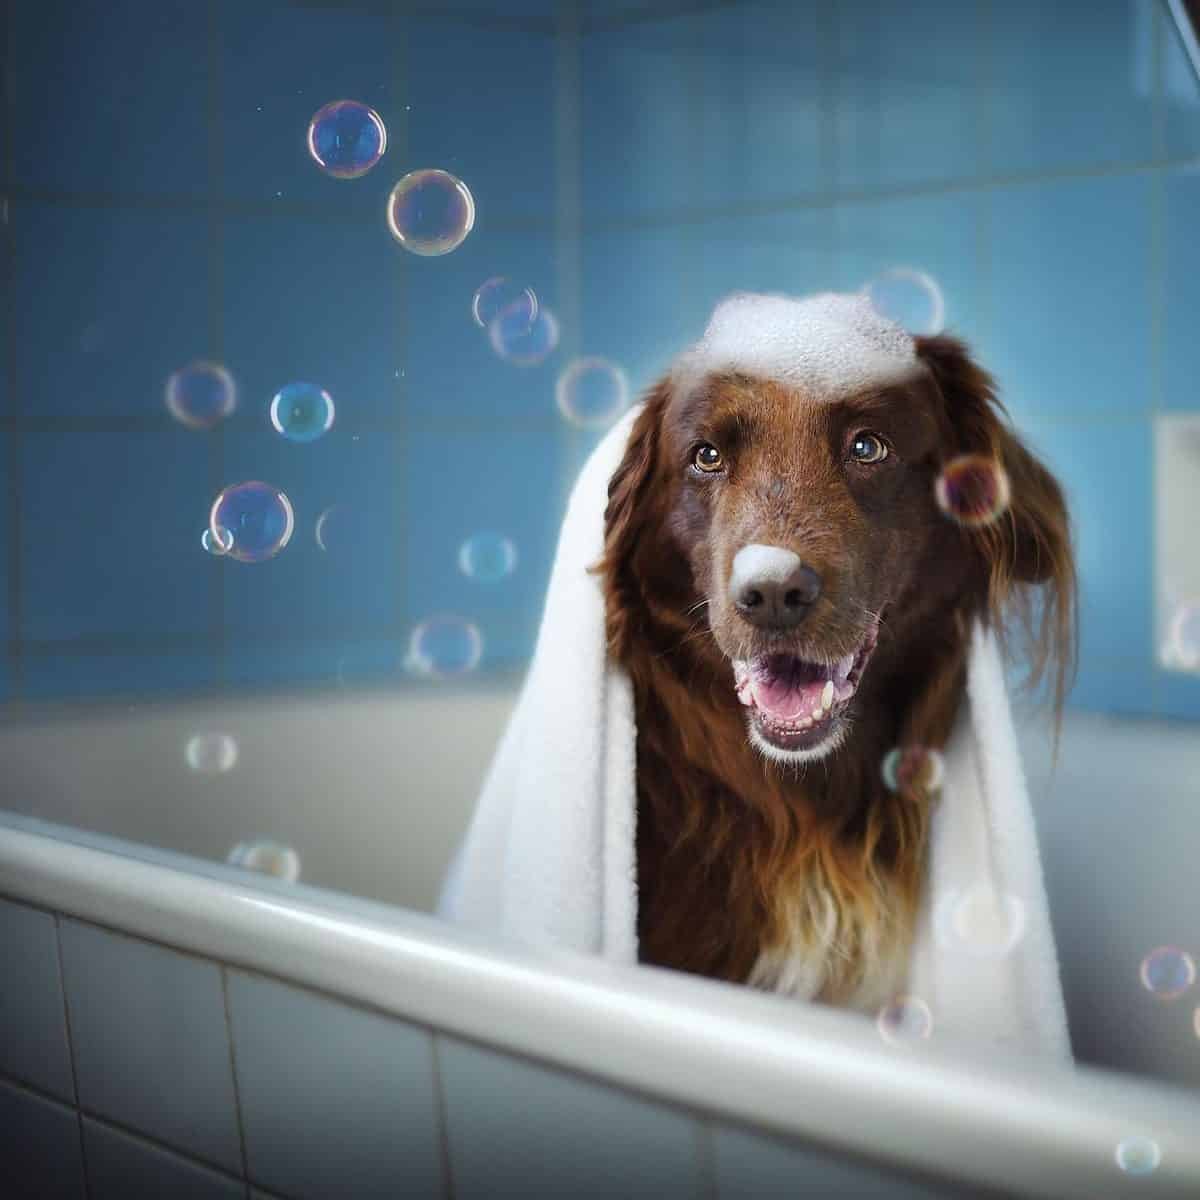 A large dog sat in the bath with bubbles on his head and large bubbles floating around him